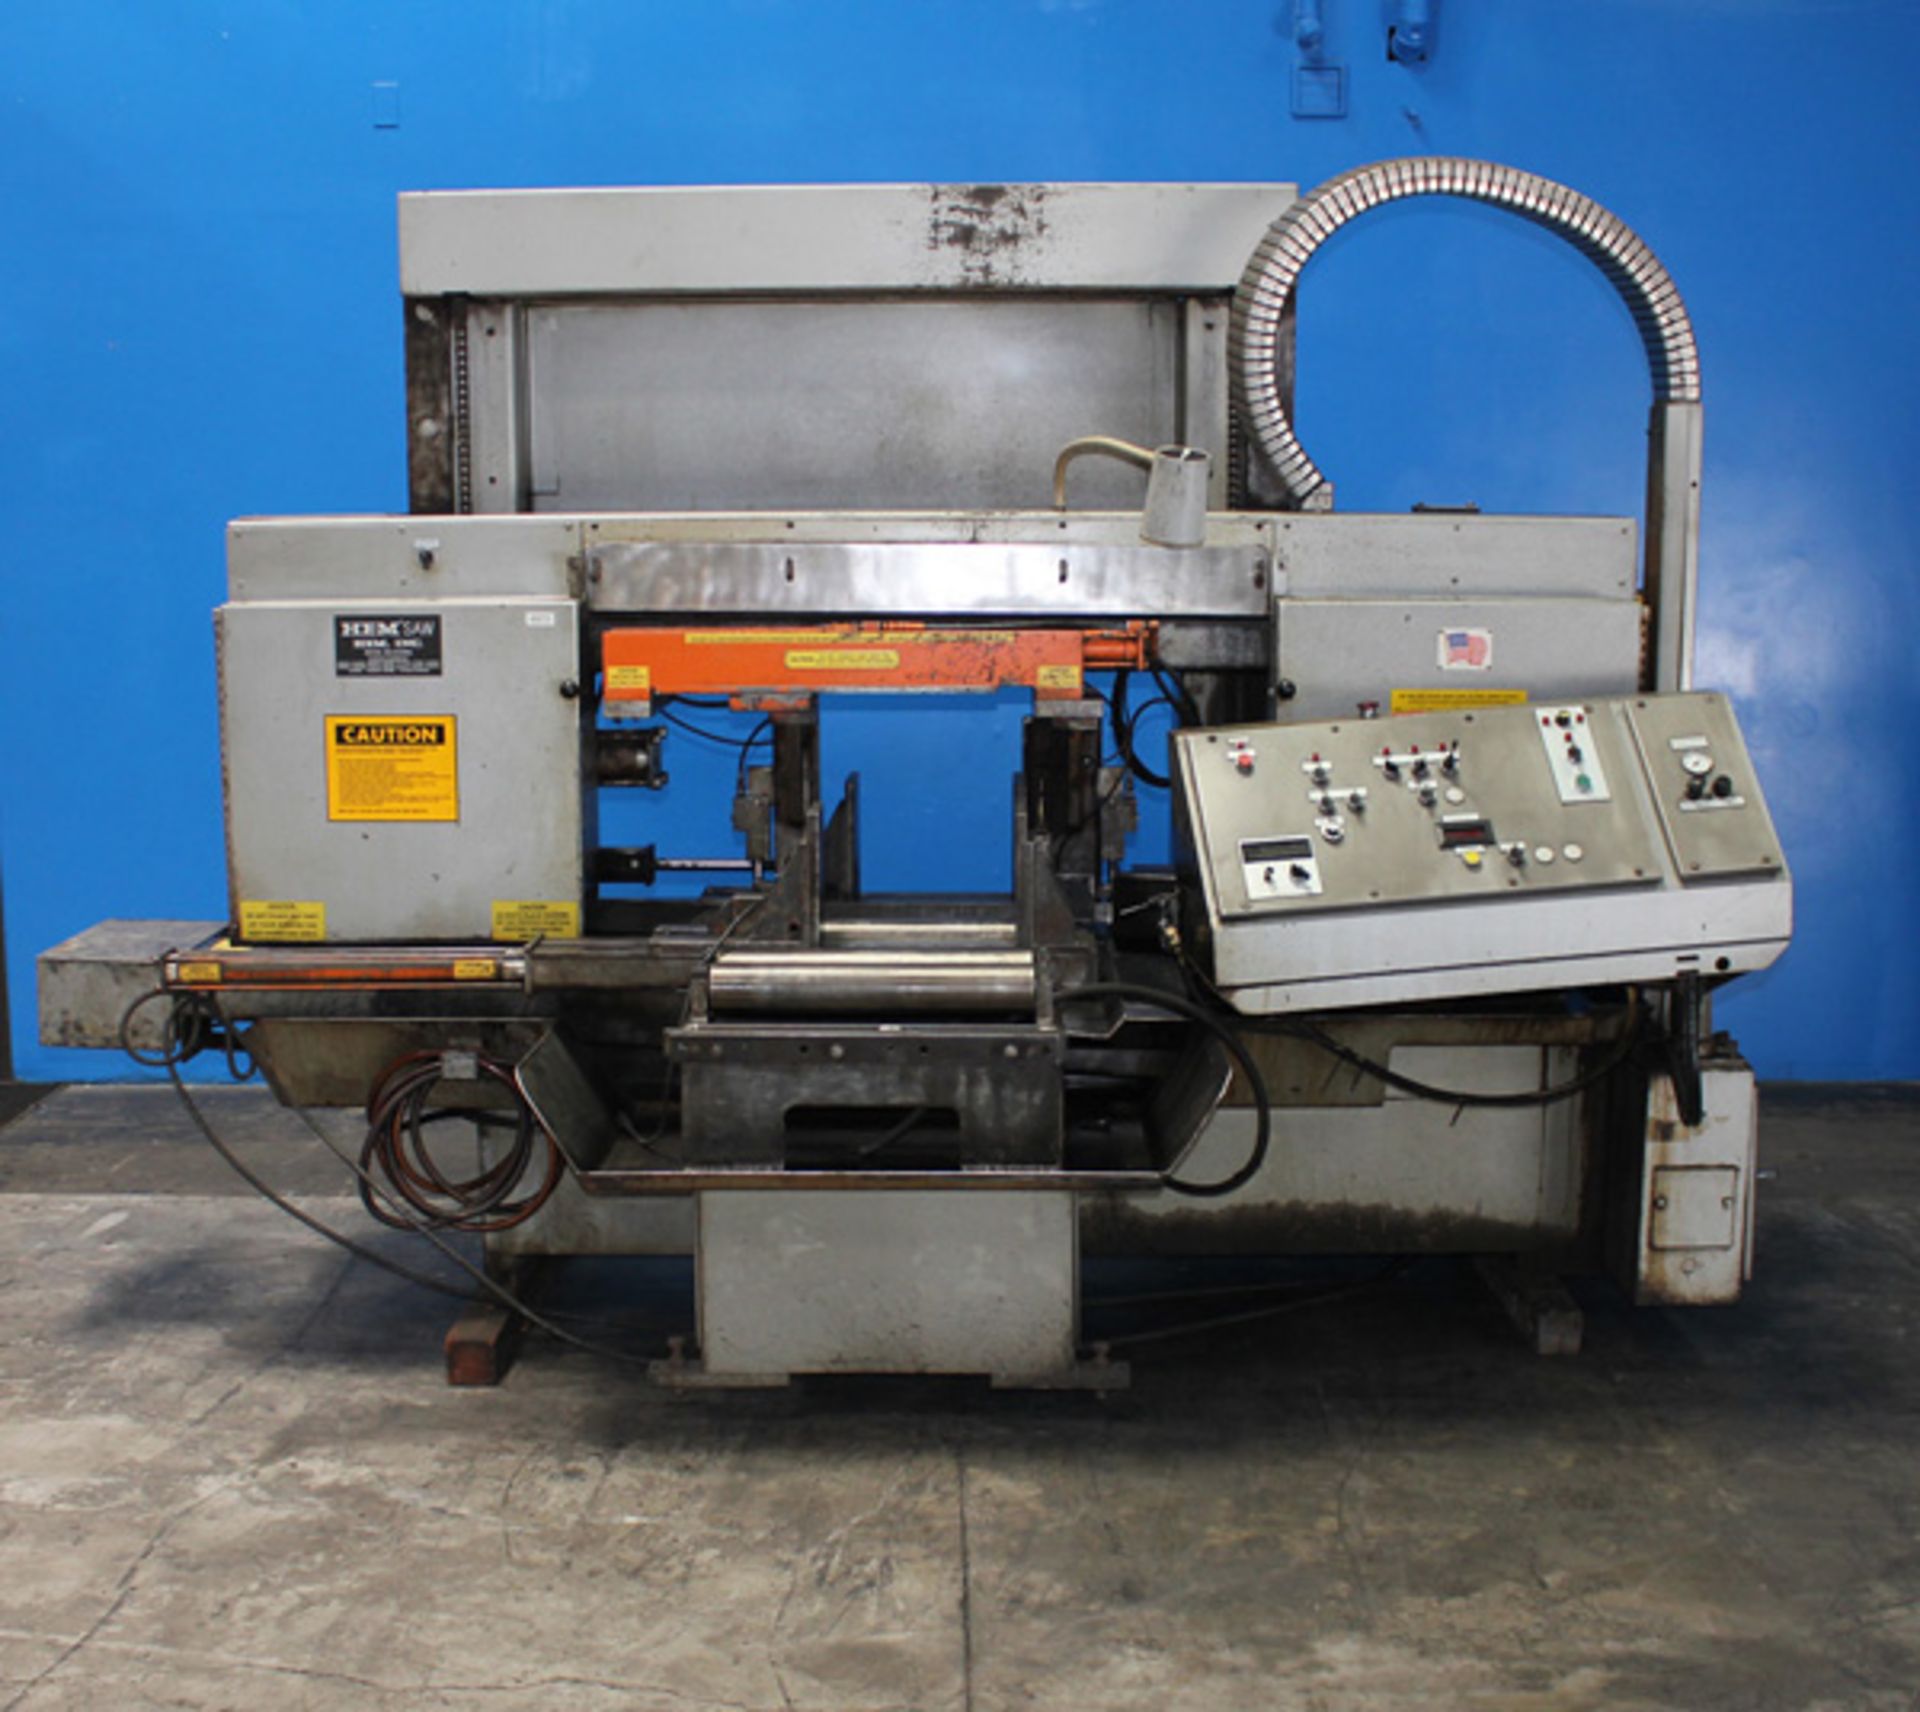 1996 HEM Semi-Automatic Horizontal Bandsaw, 18" x 20", Mdl: H130 HM- DC, S/N: 524196, Located In: